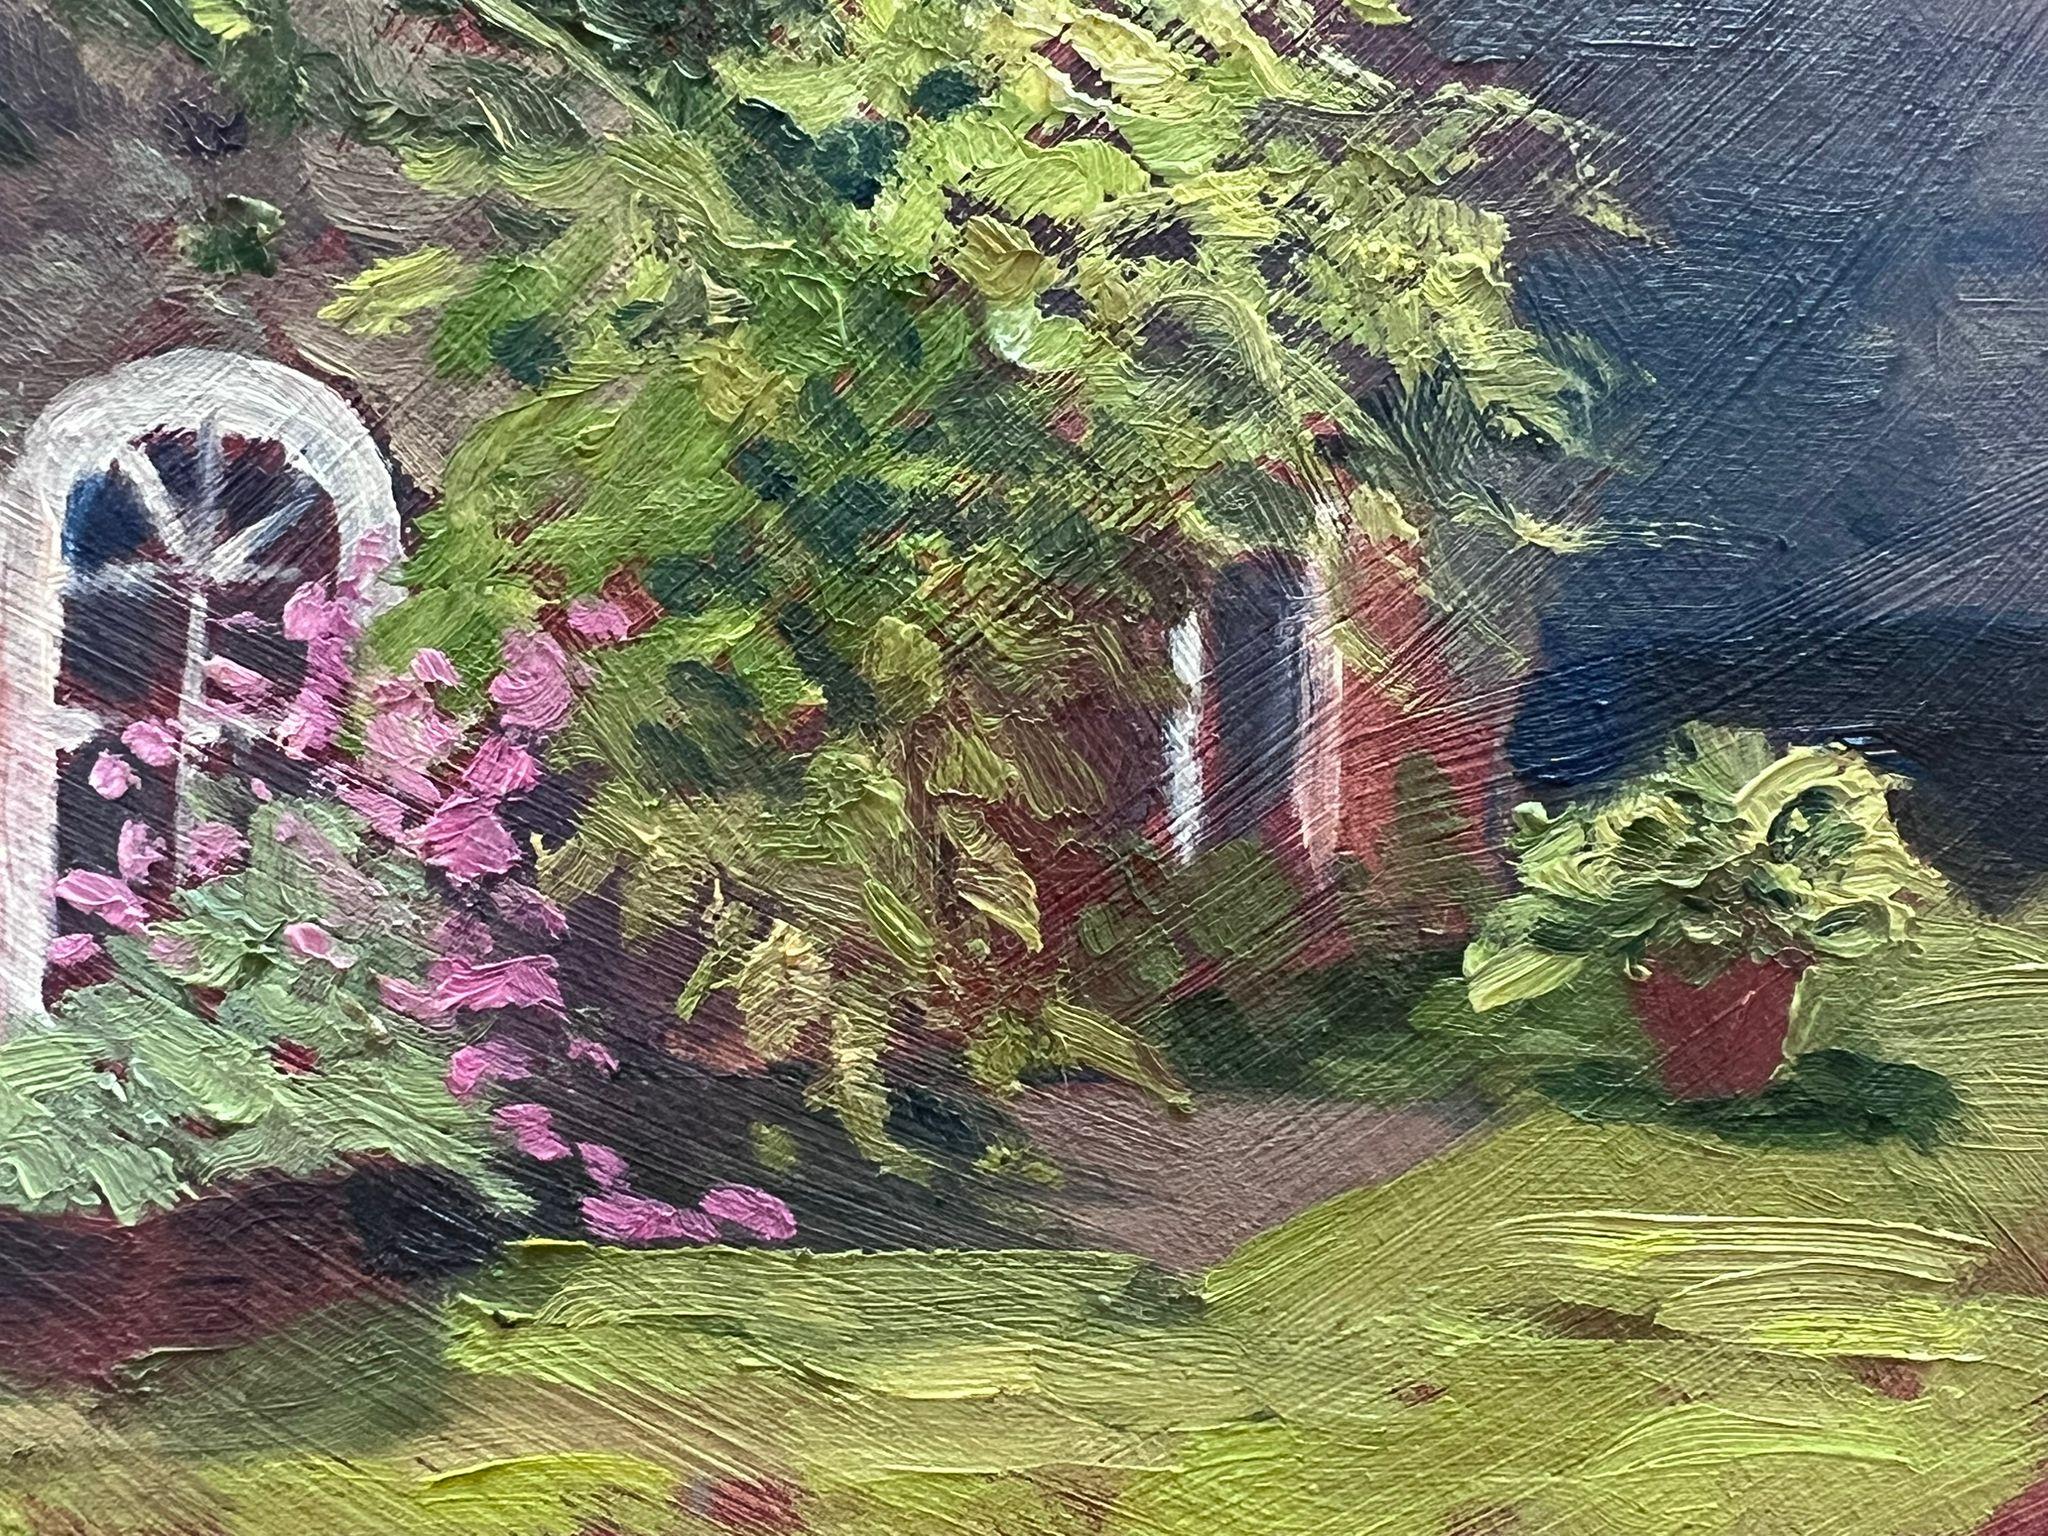 Garden View
by Geza Somerset-Paddon (British 20th century)
oil painting on board, unframed
size: 7 x 10 inches
condition: overall very good
provenance: all the paintings we have by this artist have come from their studio sale in England. 